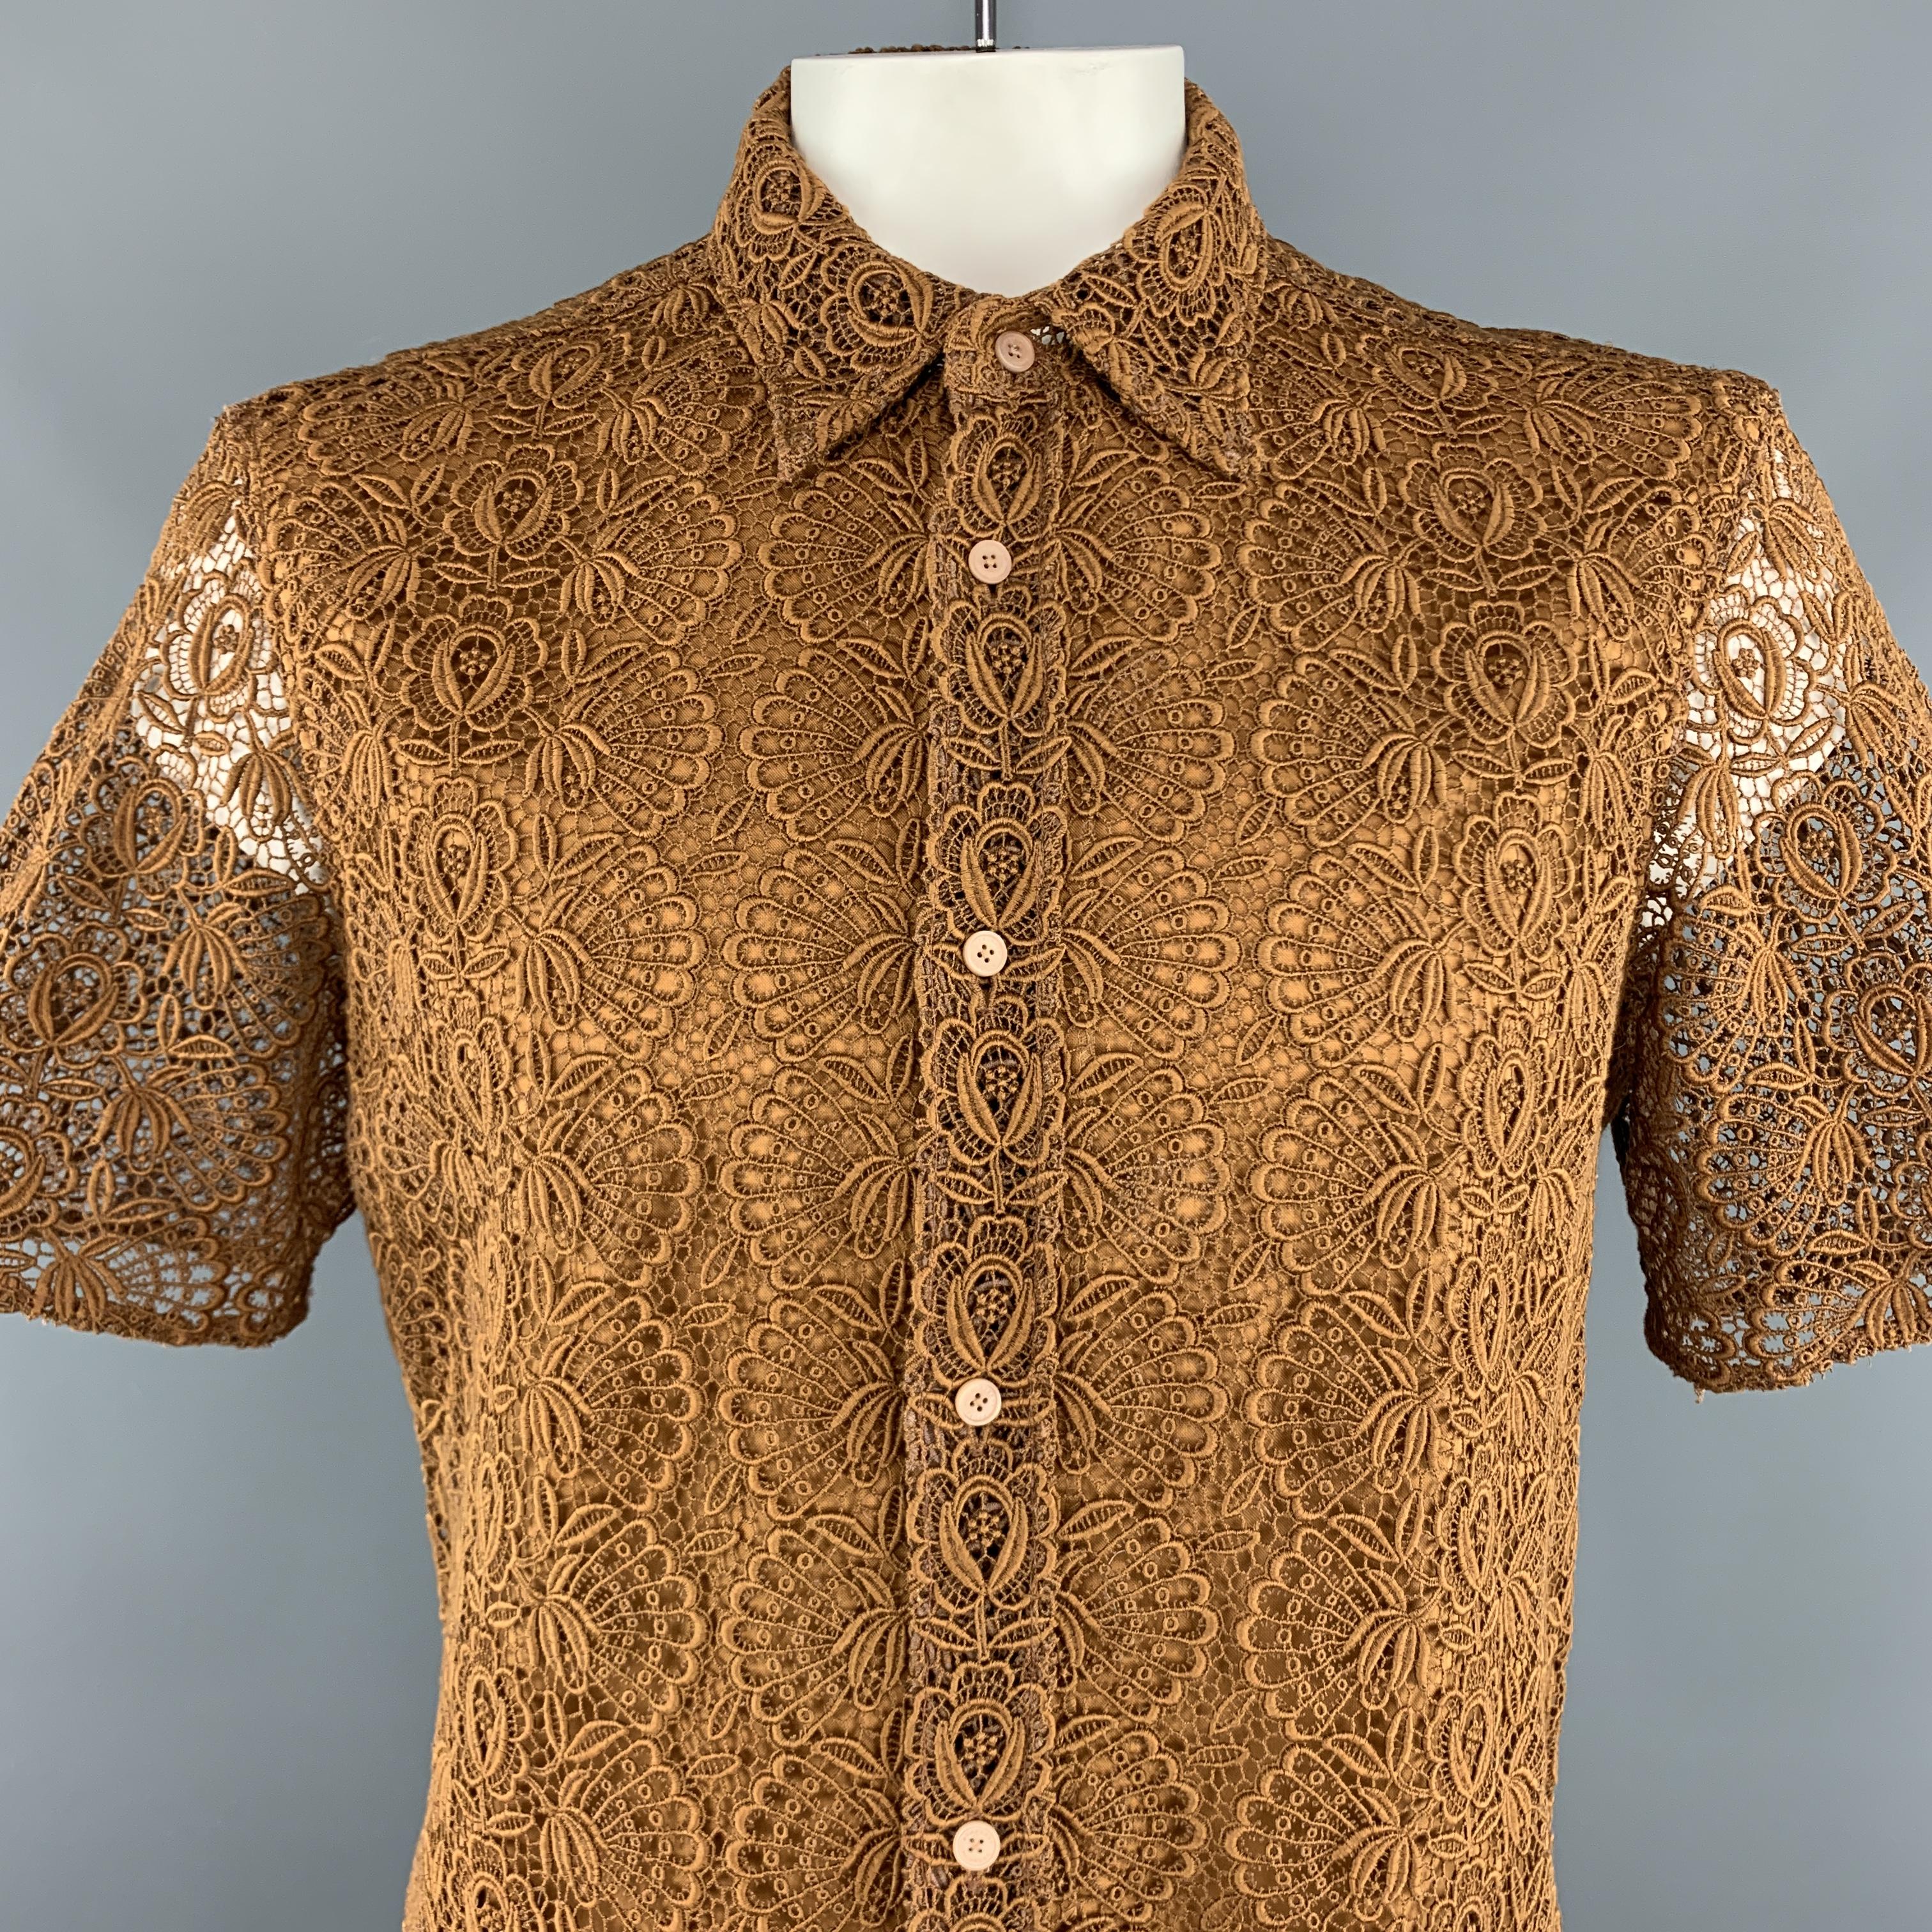 BURBERRY PRORSUM short sleeve shirt comes in a golden tan brown chunky lace with a pointed collar, and sheer, unlined back. Made in Italy.

Excellent Pre-Owned Condition.
Marked:  17 43

Measurements:

Shoulder: 19 in.
Chest: 48 in.
Sleeve: 11